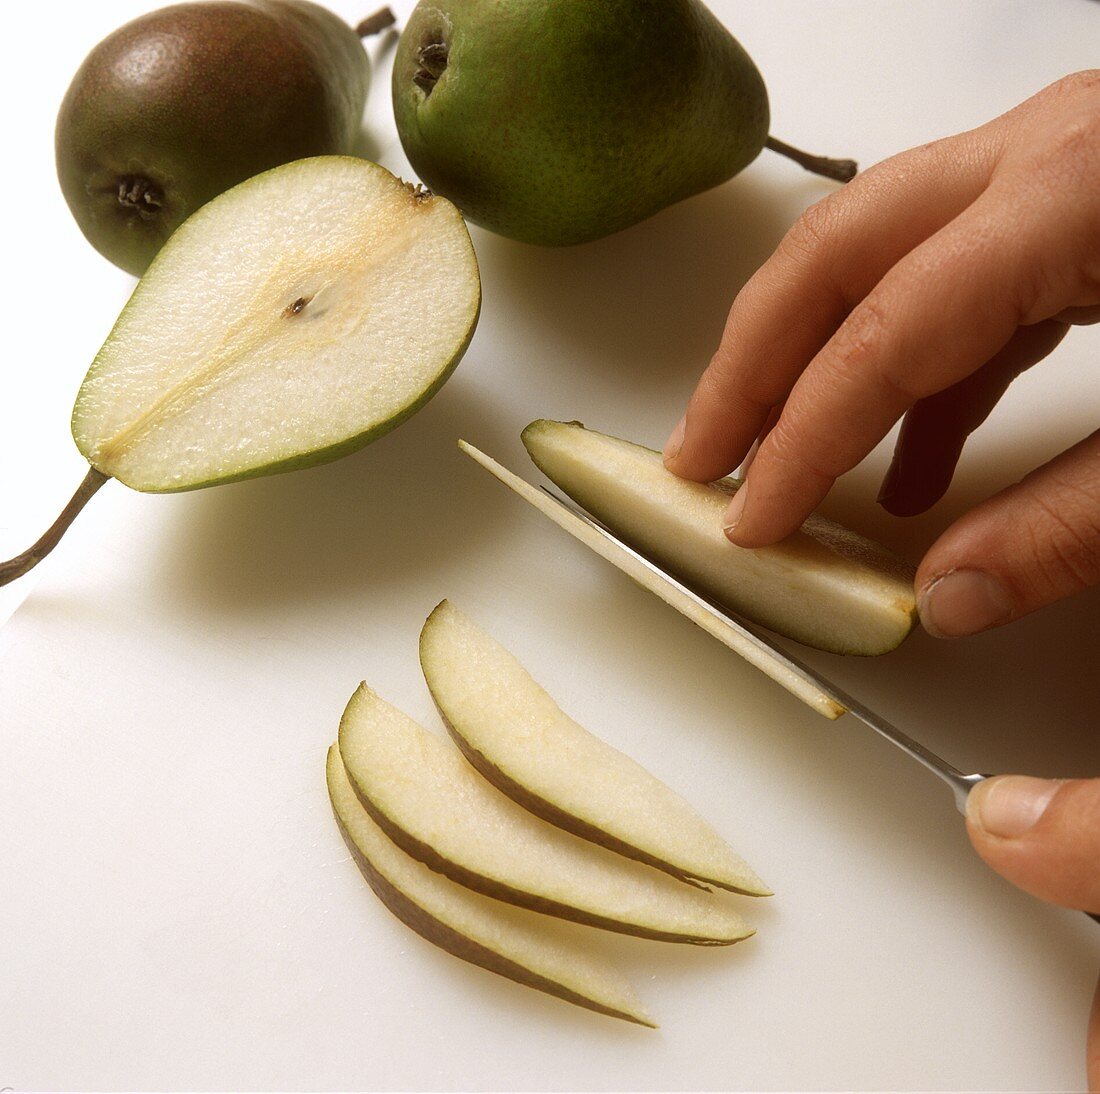 Thinly slicing pears